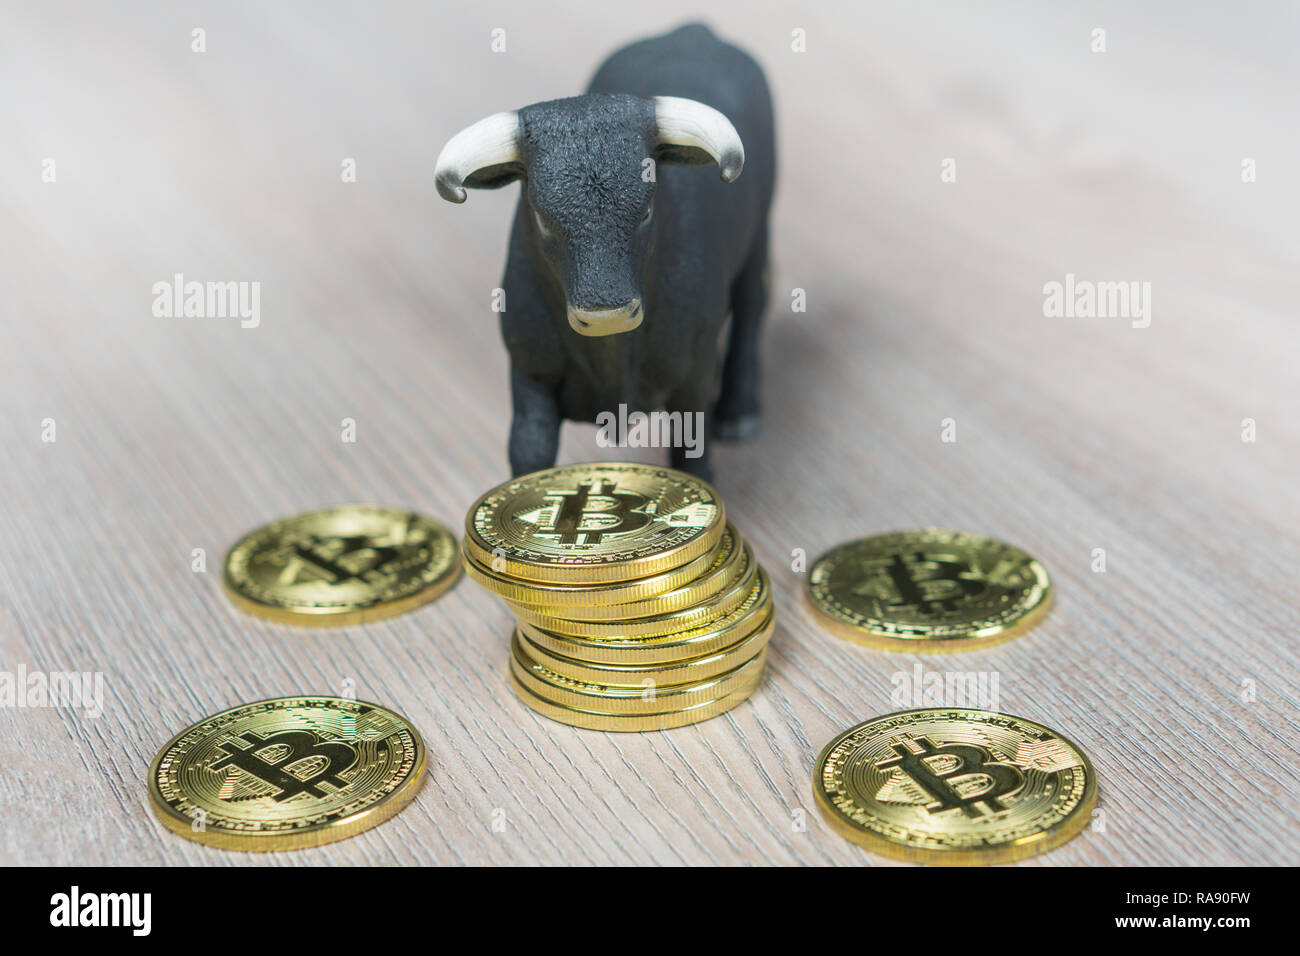 Bull market in crypto currency. Bull next to stack of bitcoin coins Stock Photo